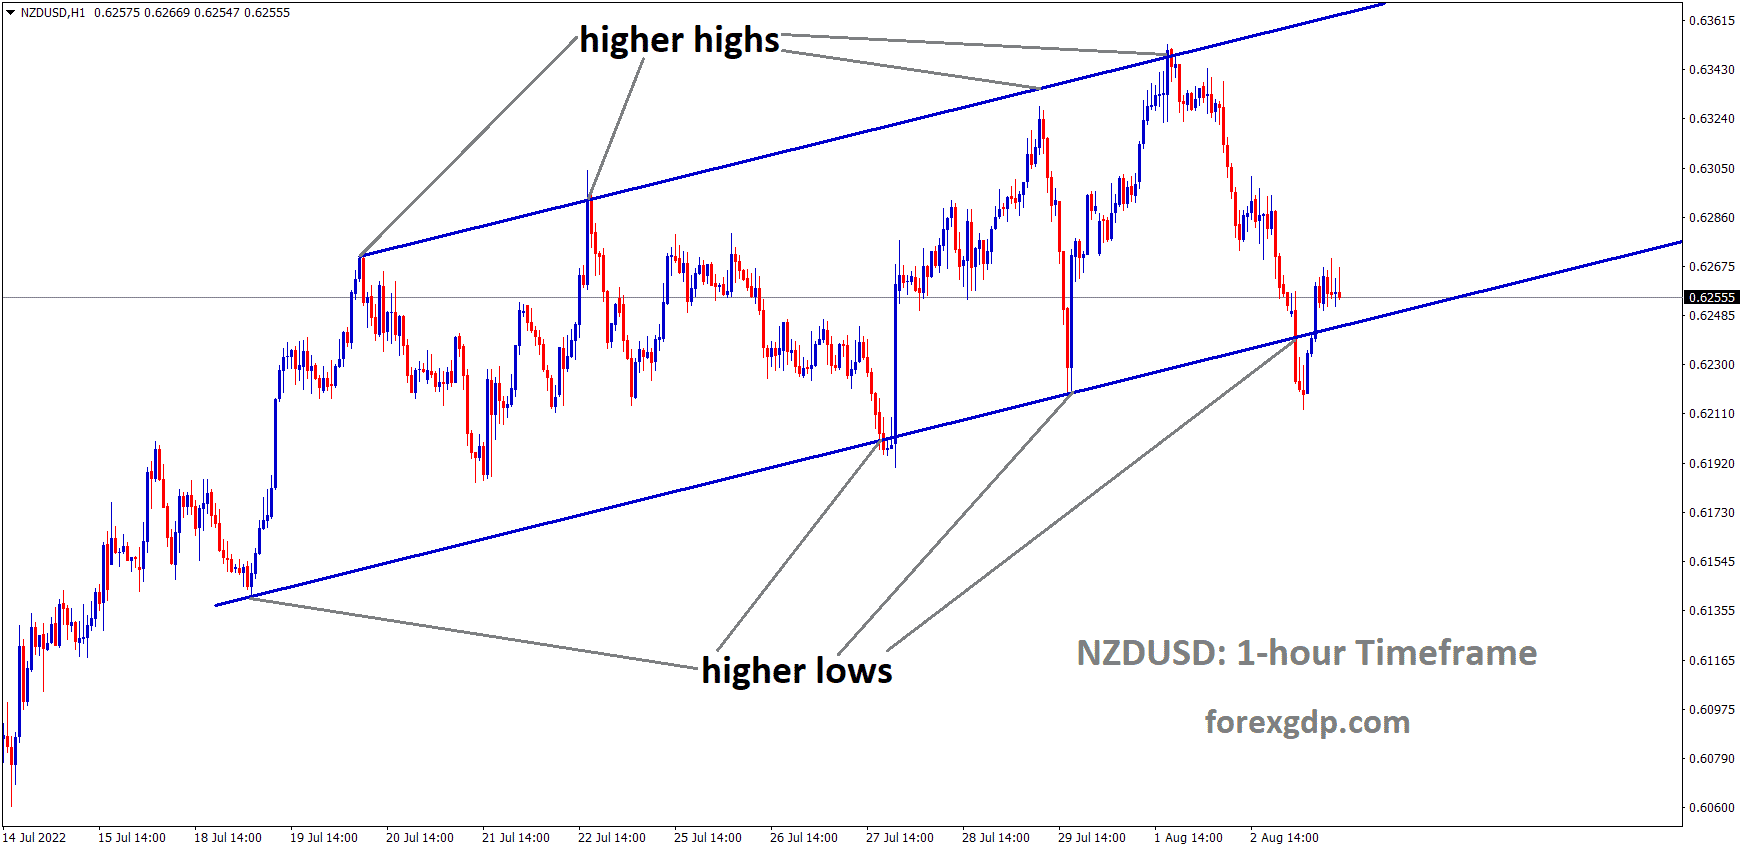 NZDUSD is moving in an Ascending channel and the Market has rebounded from the higher low area of the channel.